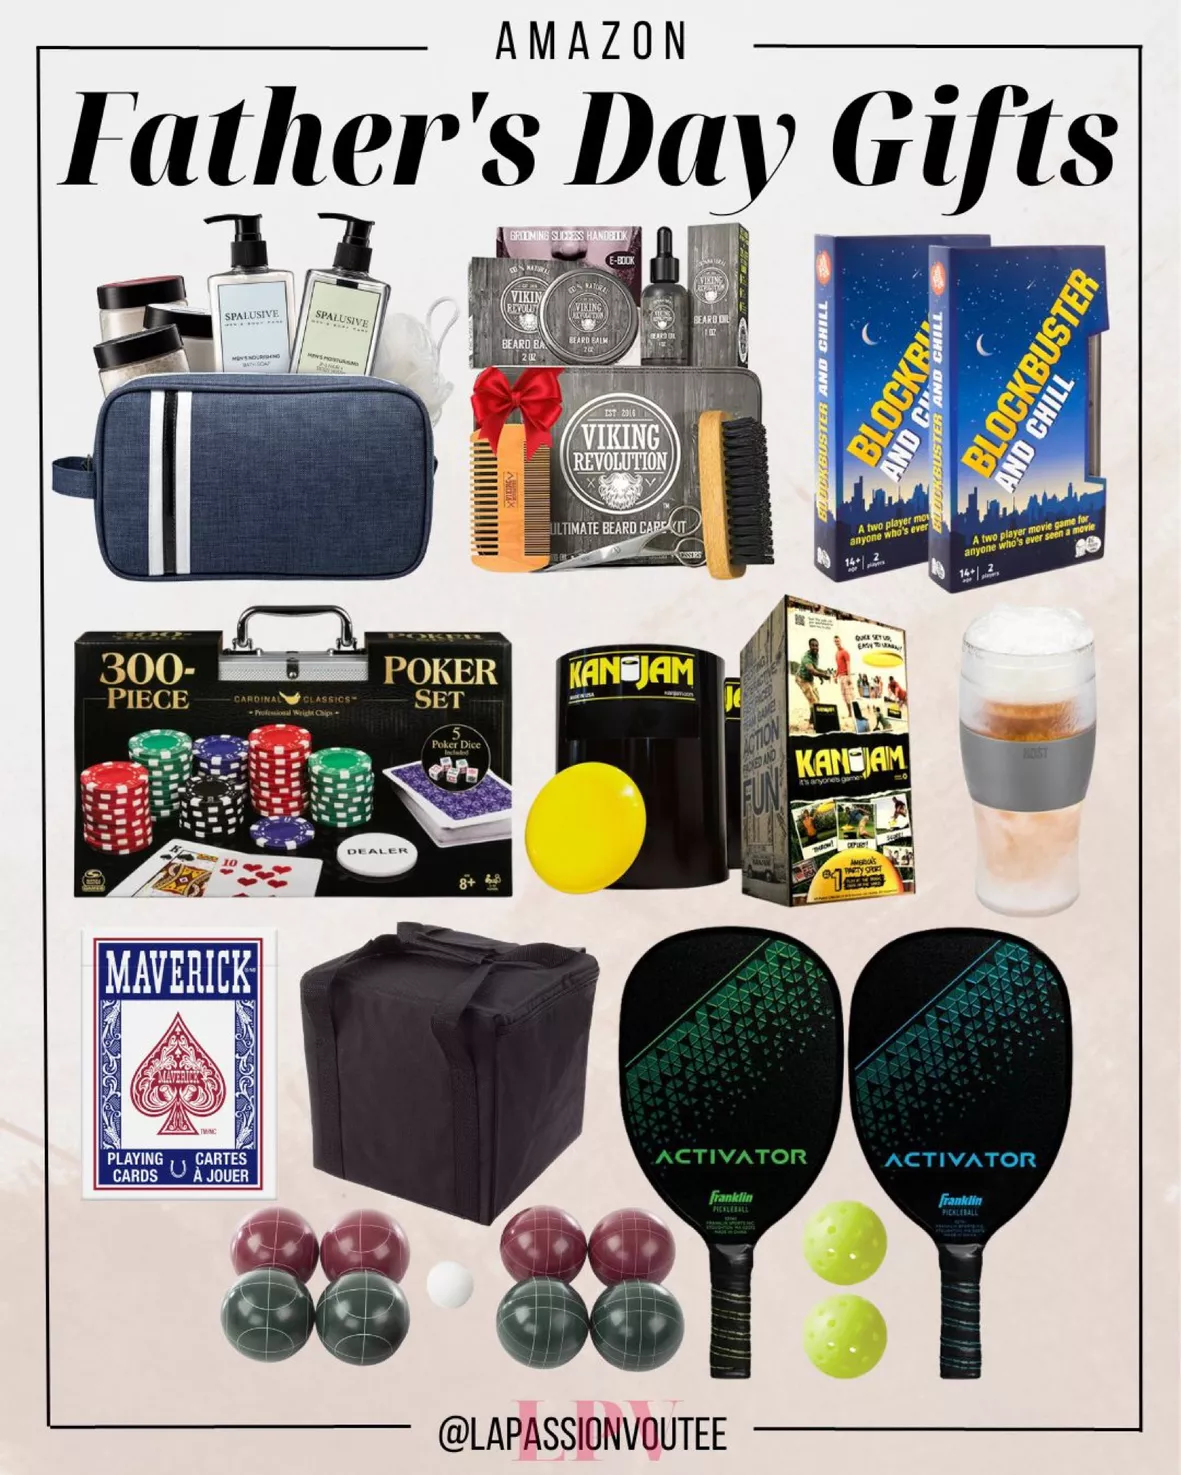 The (Vater) Dad Gift Pack